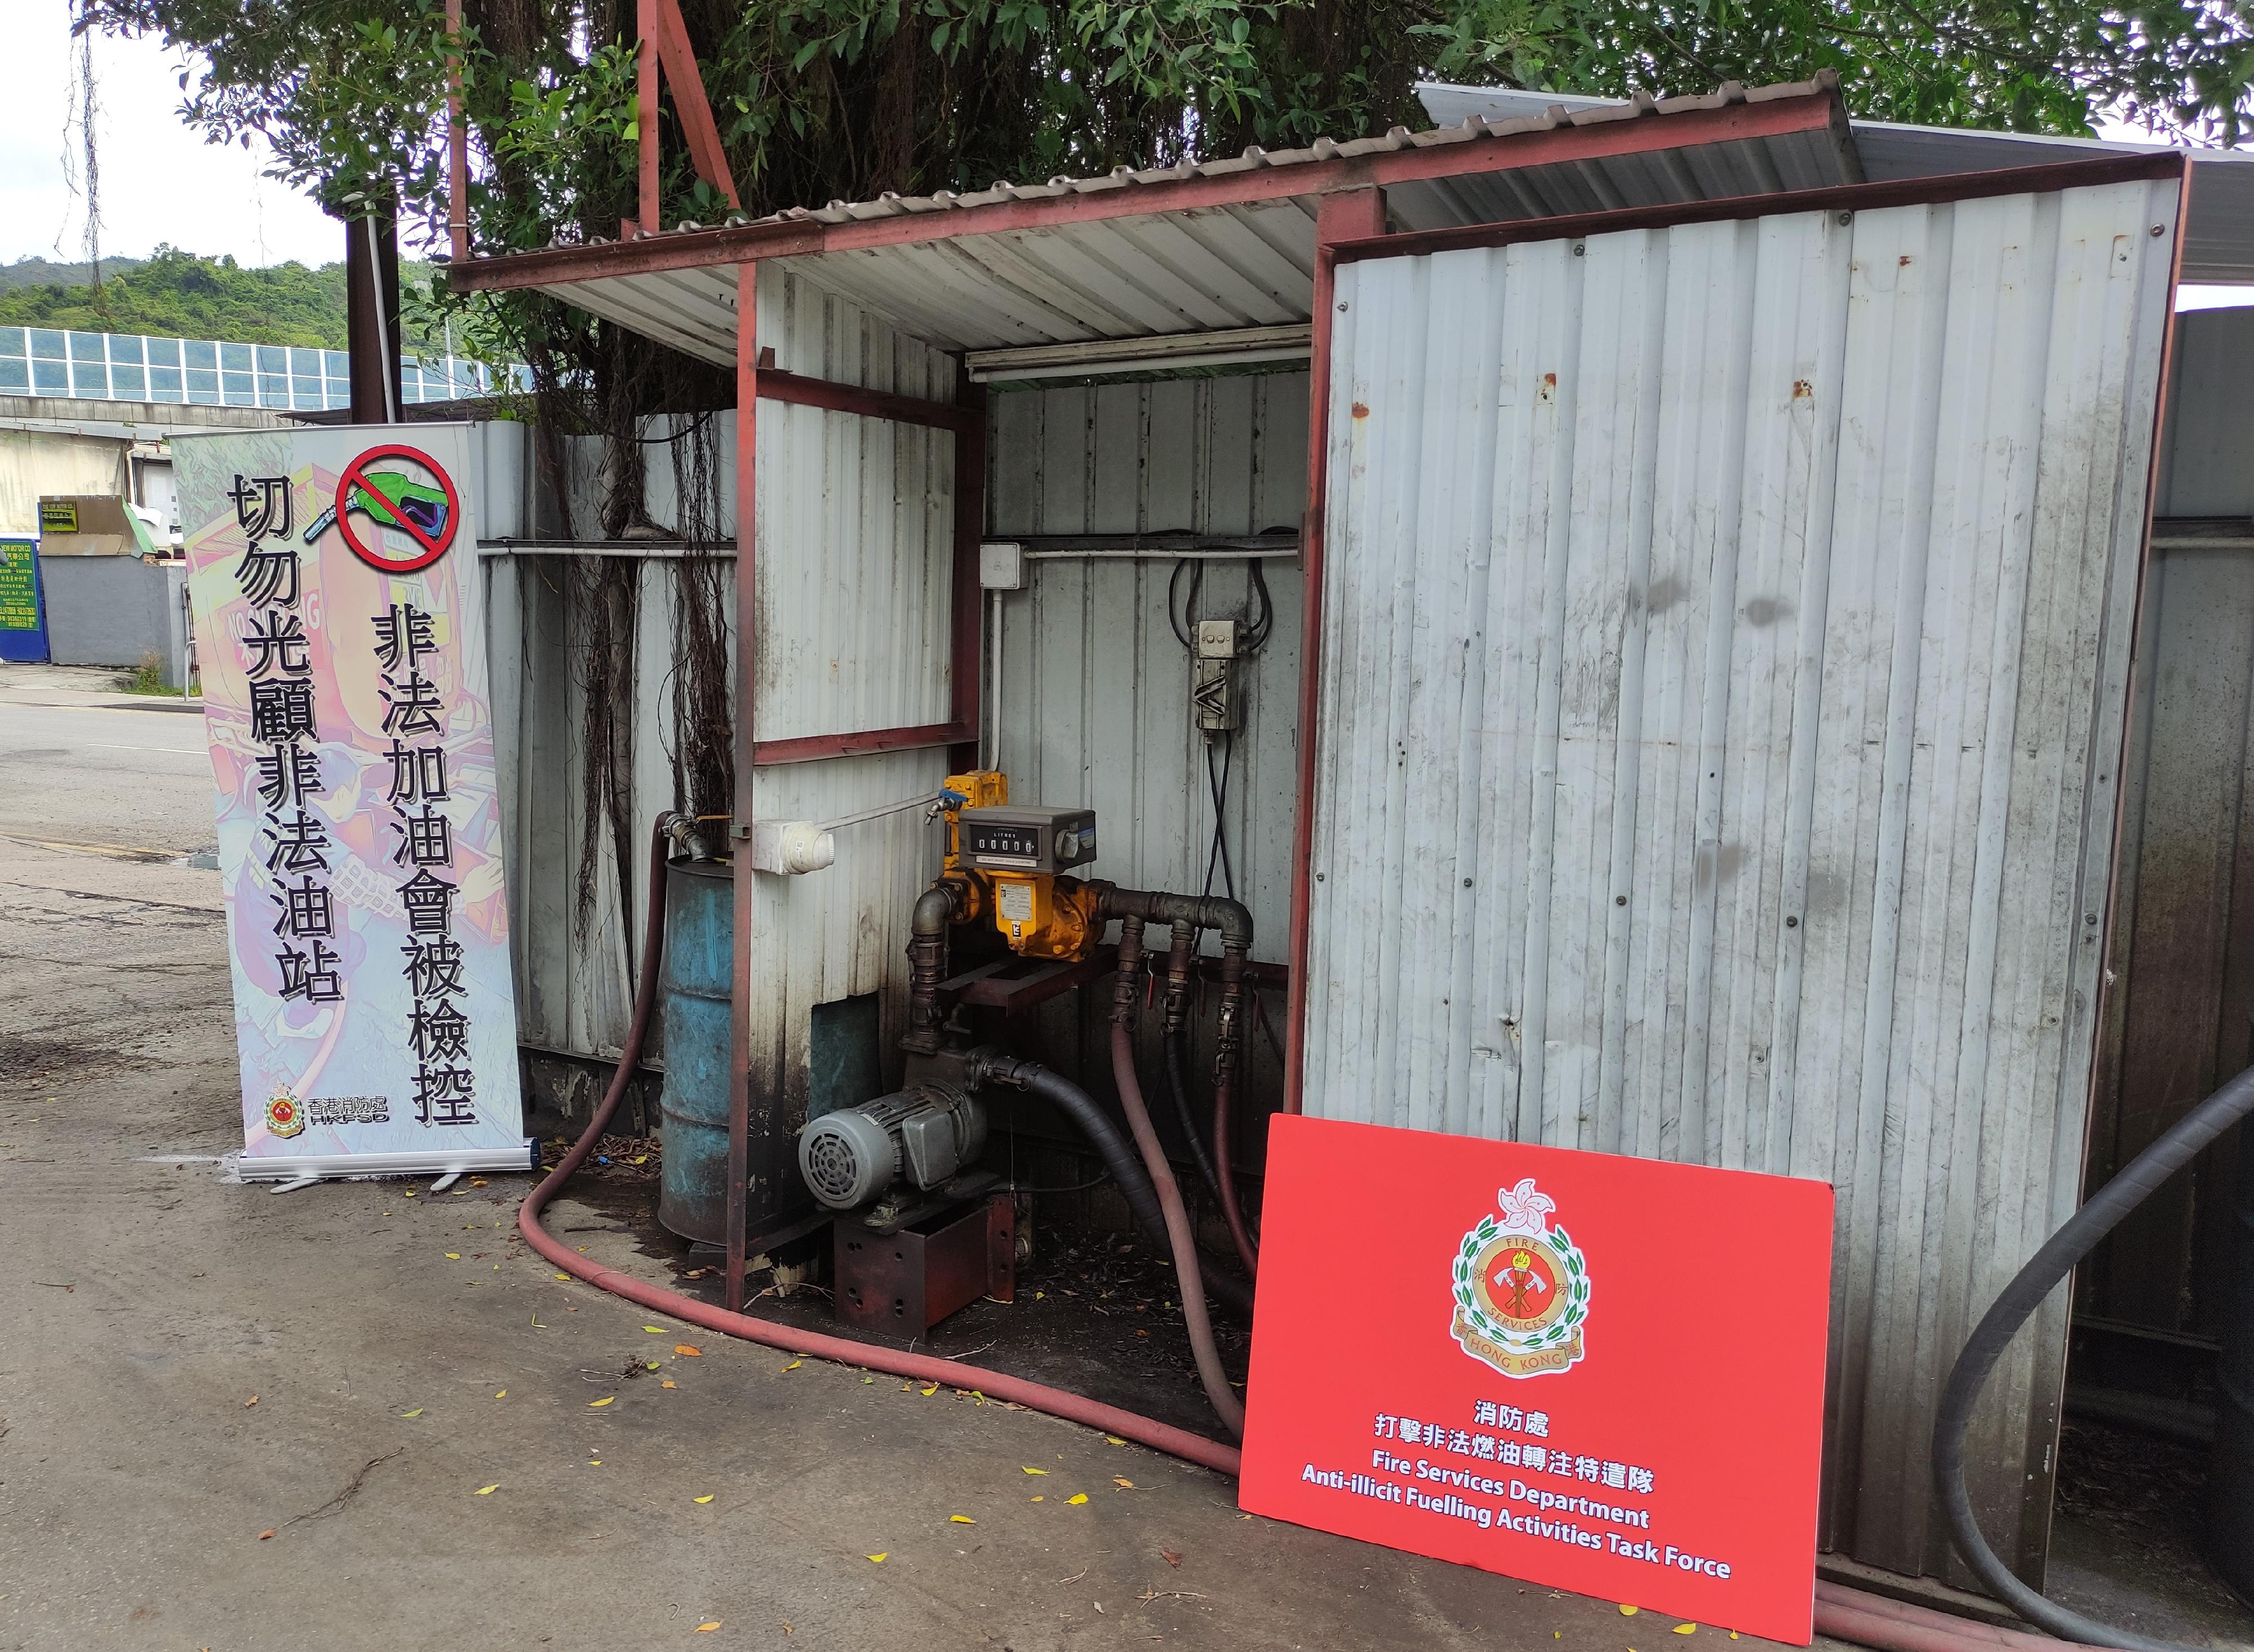 The Fire Services Department, the Hong Kong Police Force and Hong Kong Customs mounted a territory-wide joint operation codenamed "Crescent" from June 7 to 9 to combat illicit fuelling activities. Photo shows fuelling facilities at a suspected illegal fuelling station.